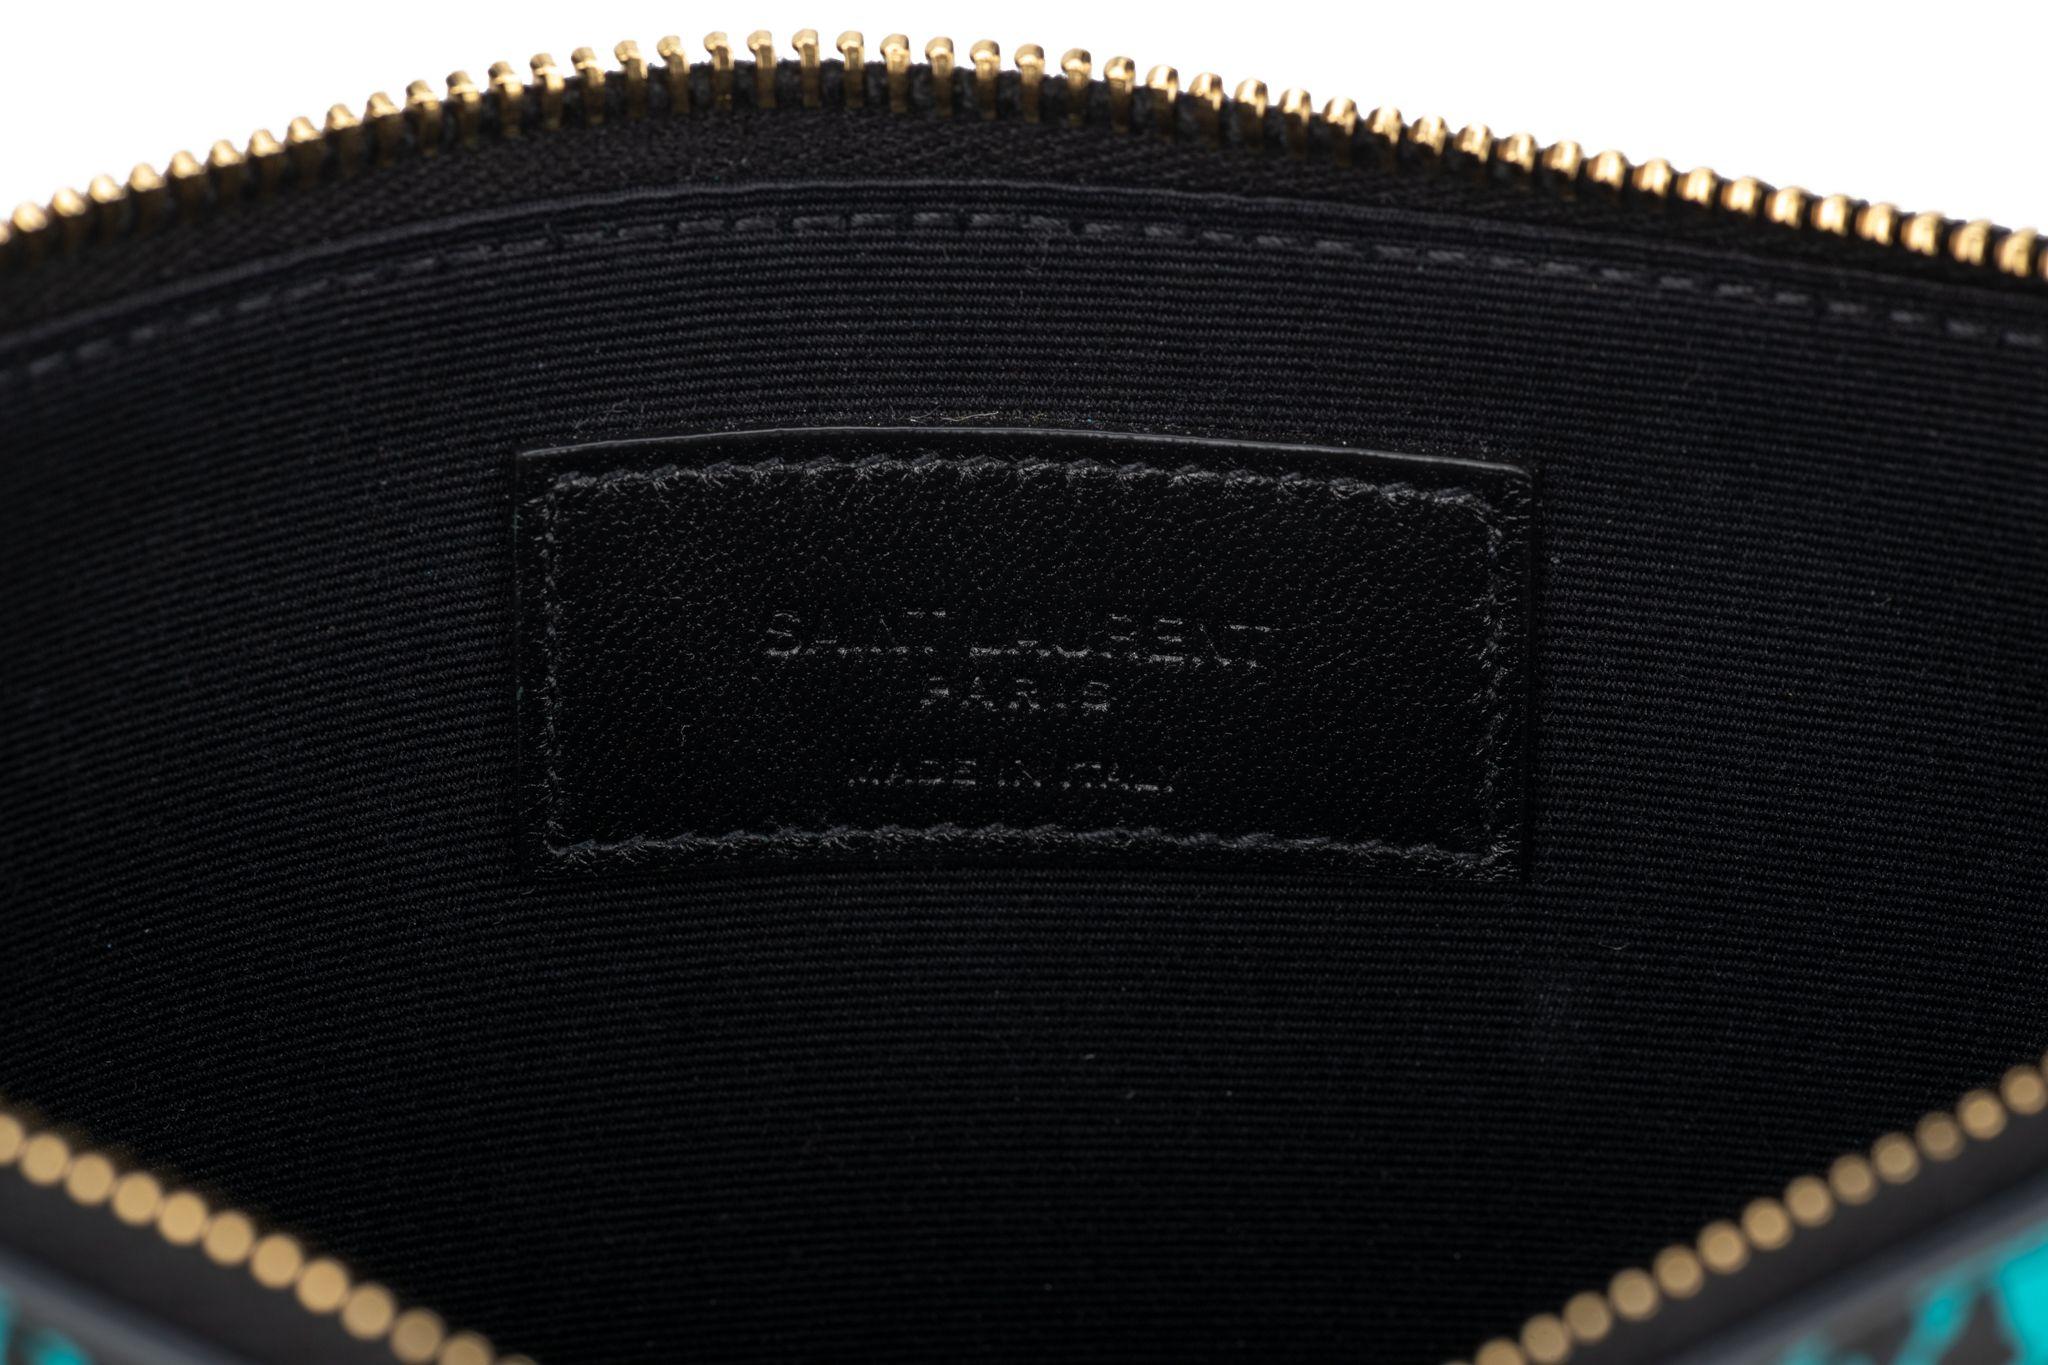 Yves Saint Laurent pouch made of smooth calfskin leather in a leopard/heart pattern. Saint Laurent Paris logo printed is printed in gold. Gold top zipper opens to a black fabric interior. The piece is new and comes with the booklet, dustcover and